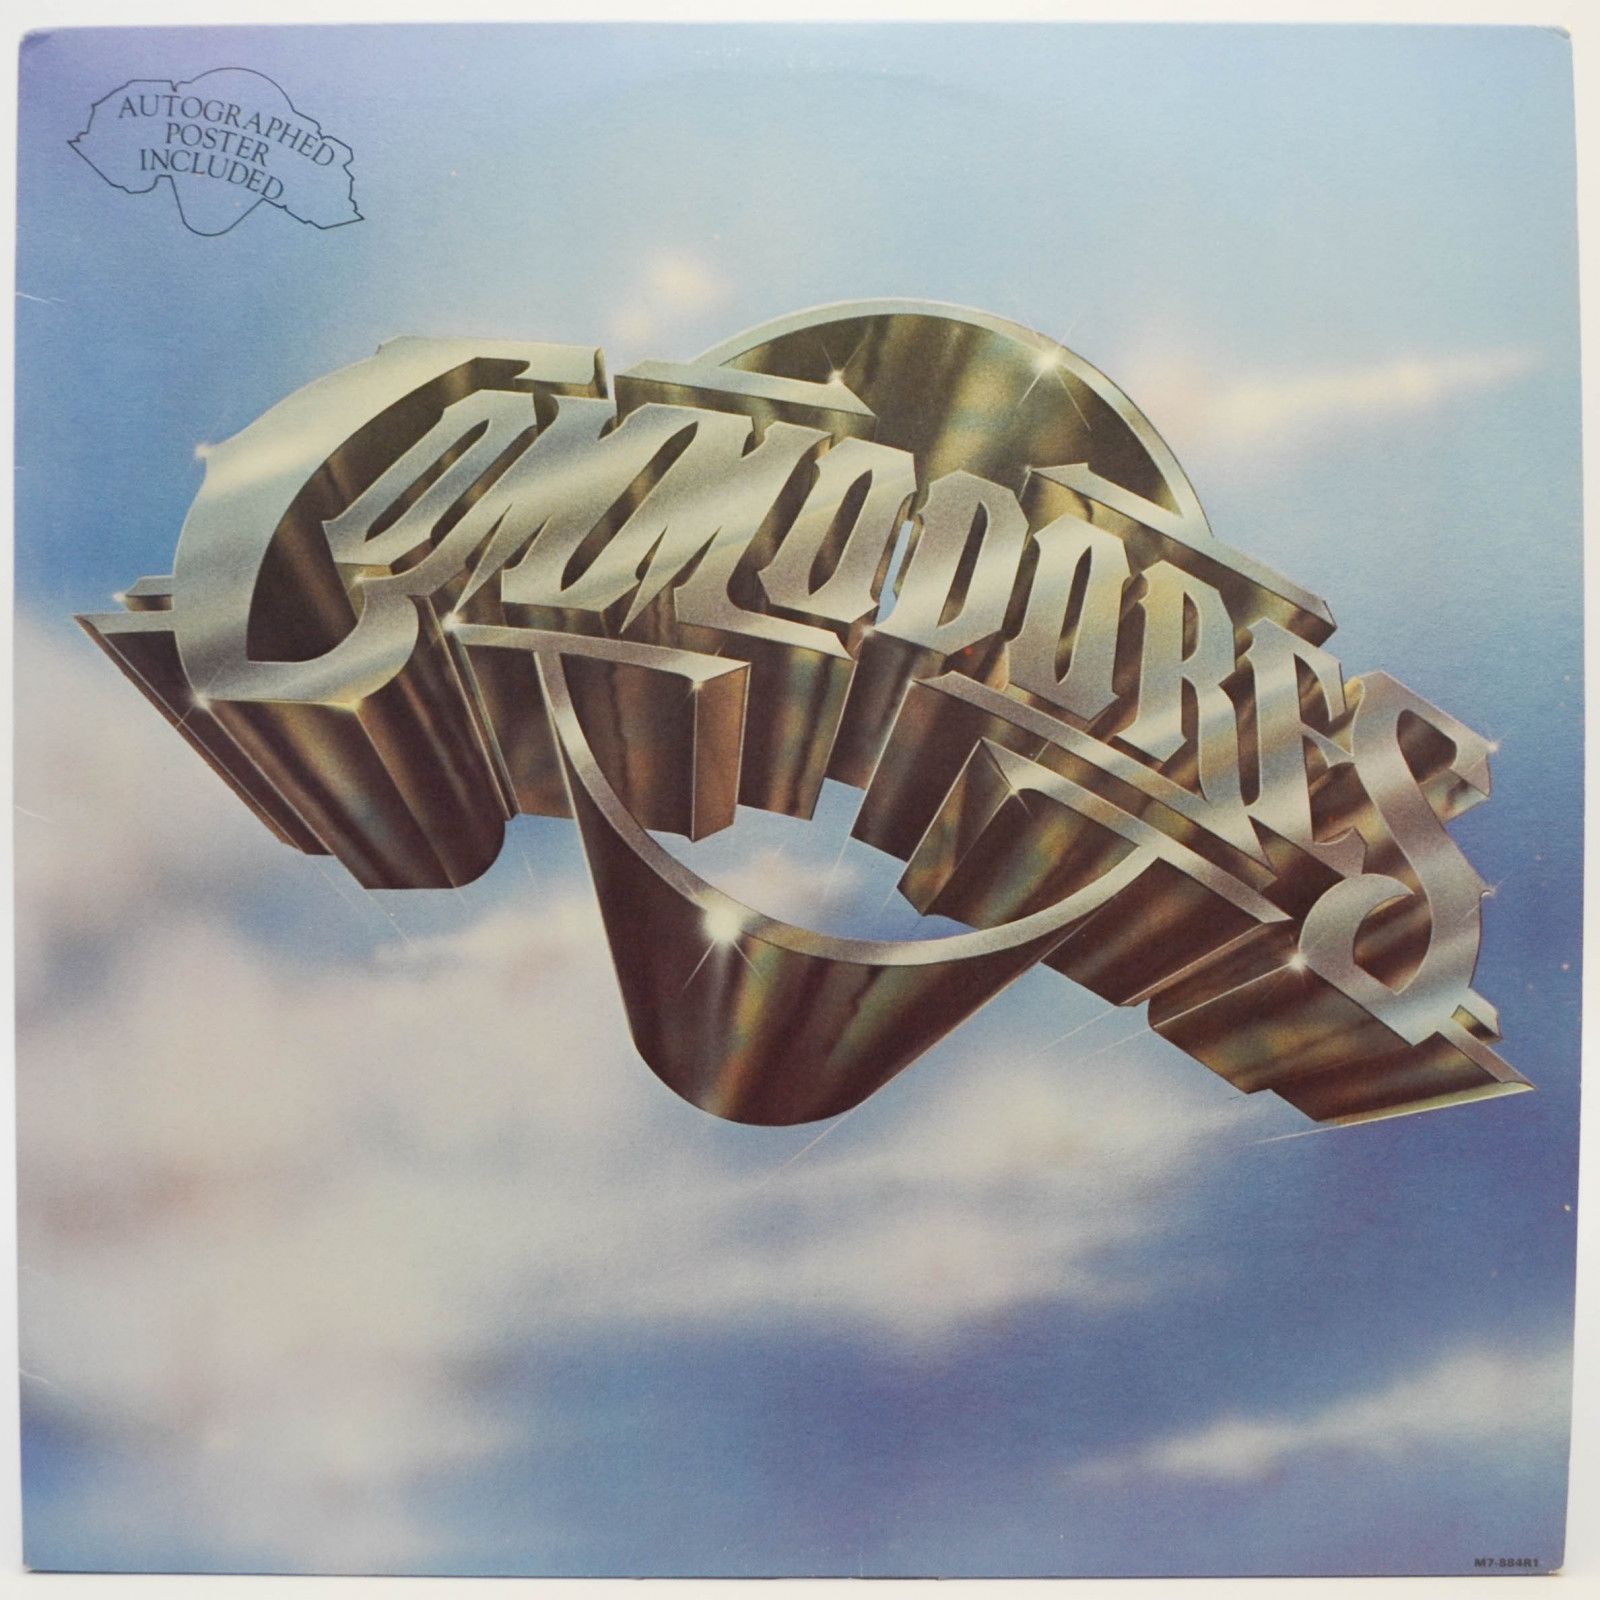 Commodores — Commodores (1-st, USA, poster), 1977